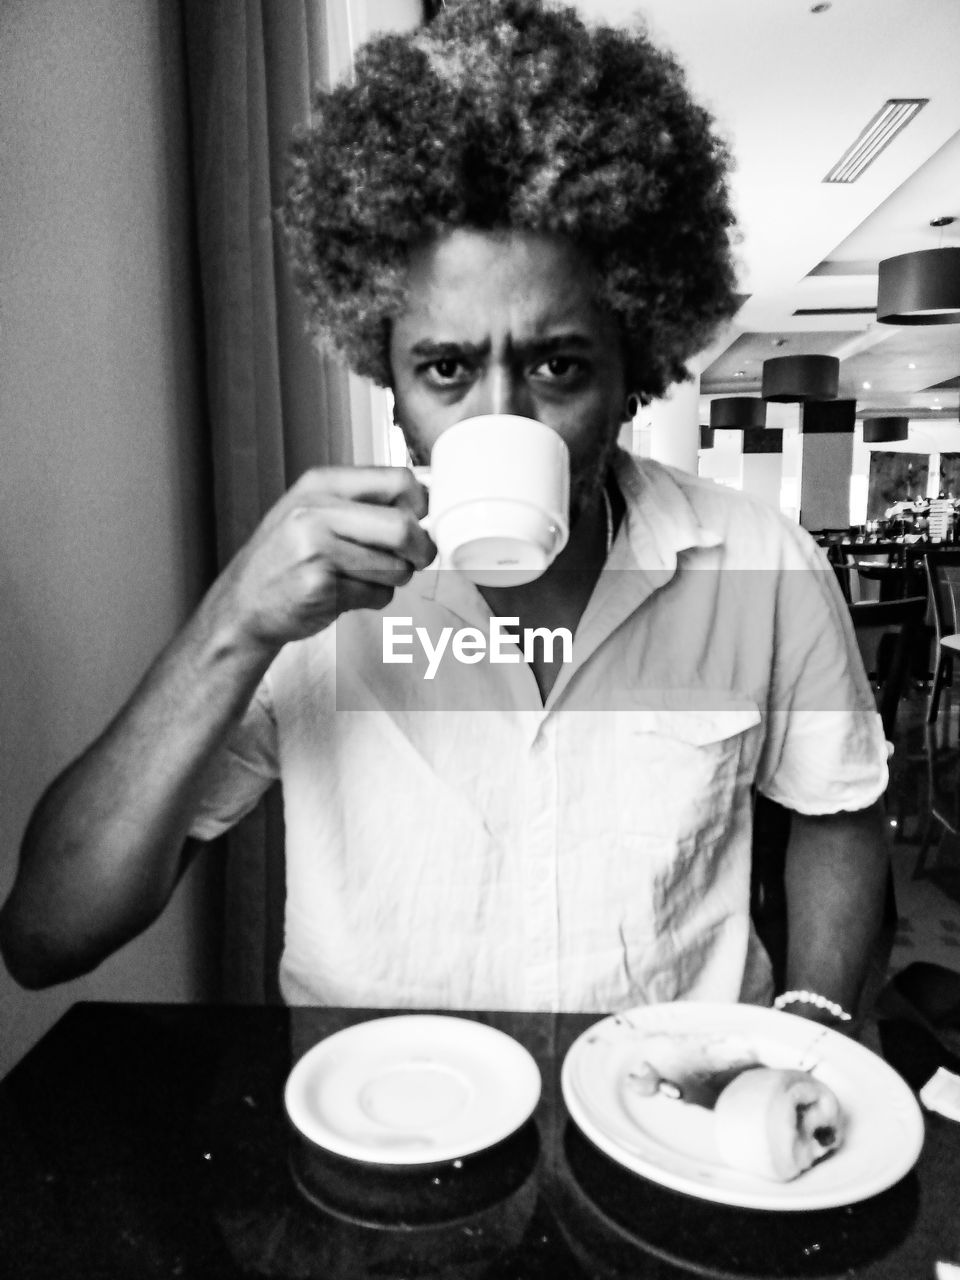 black, one person, white, adult, black and white, food and drink, monochrome, indoors, person, monochrome photography, curly hair, portrait, human hair, clothing, front view, men, looking at camera, food, tableware, young adult, lifestyles, drink, coffee, waist up, cup, holding, human face, hairstyle, business, mug, table, refreshment, coffee cup, occupation, sitting